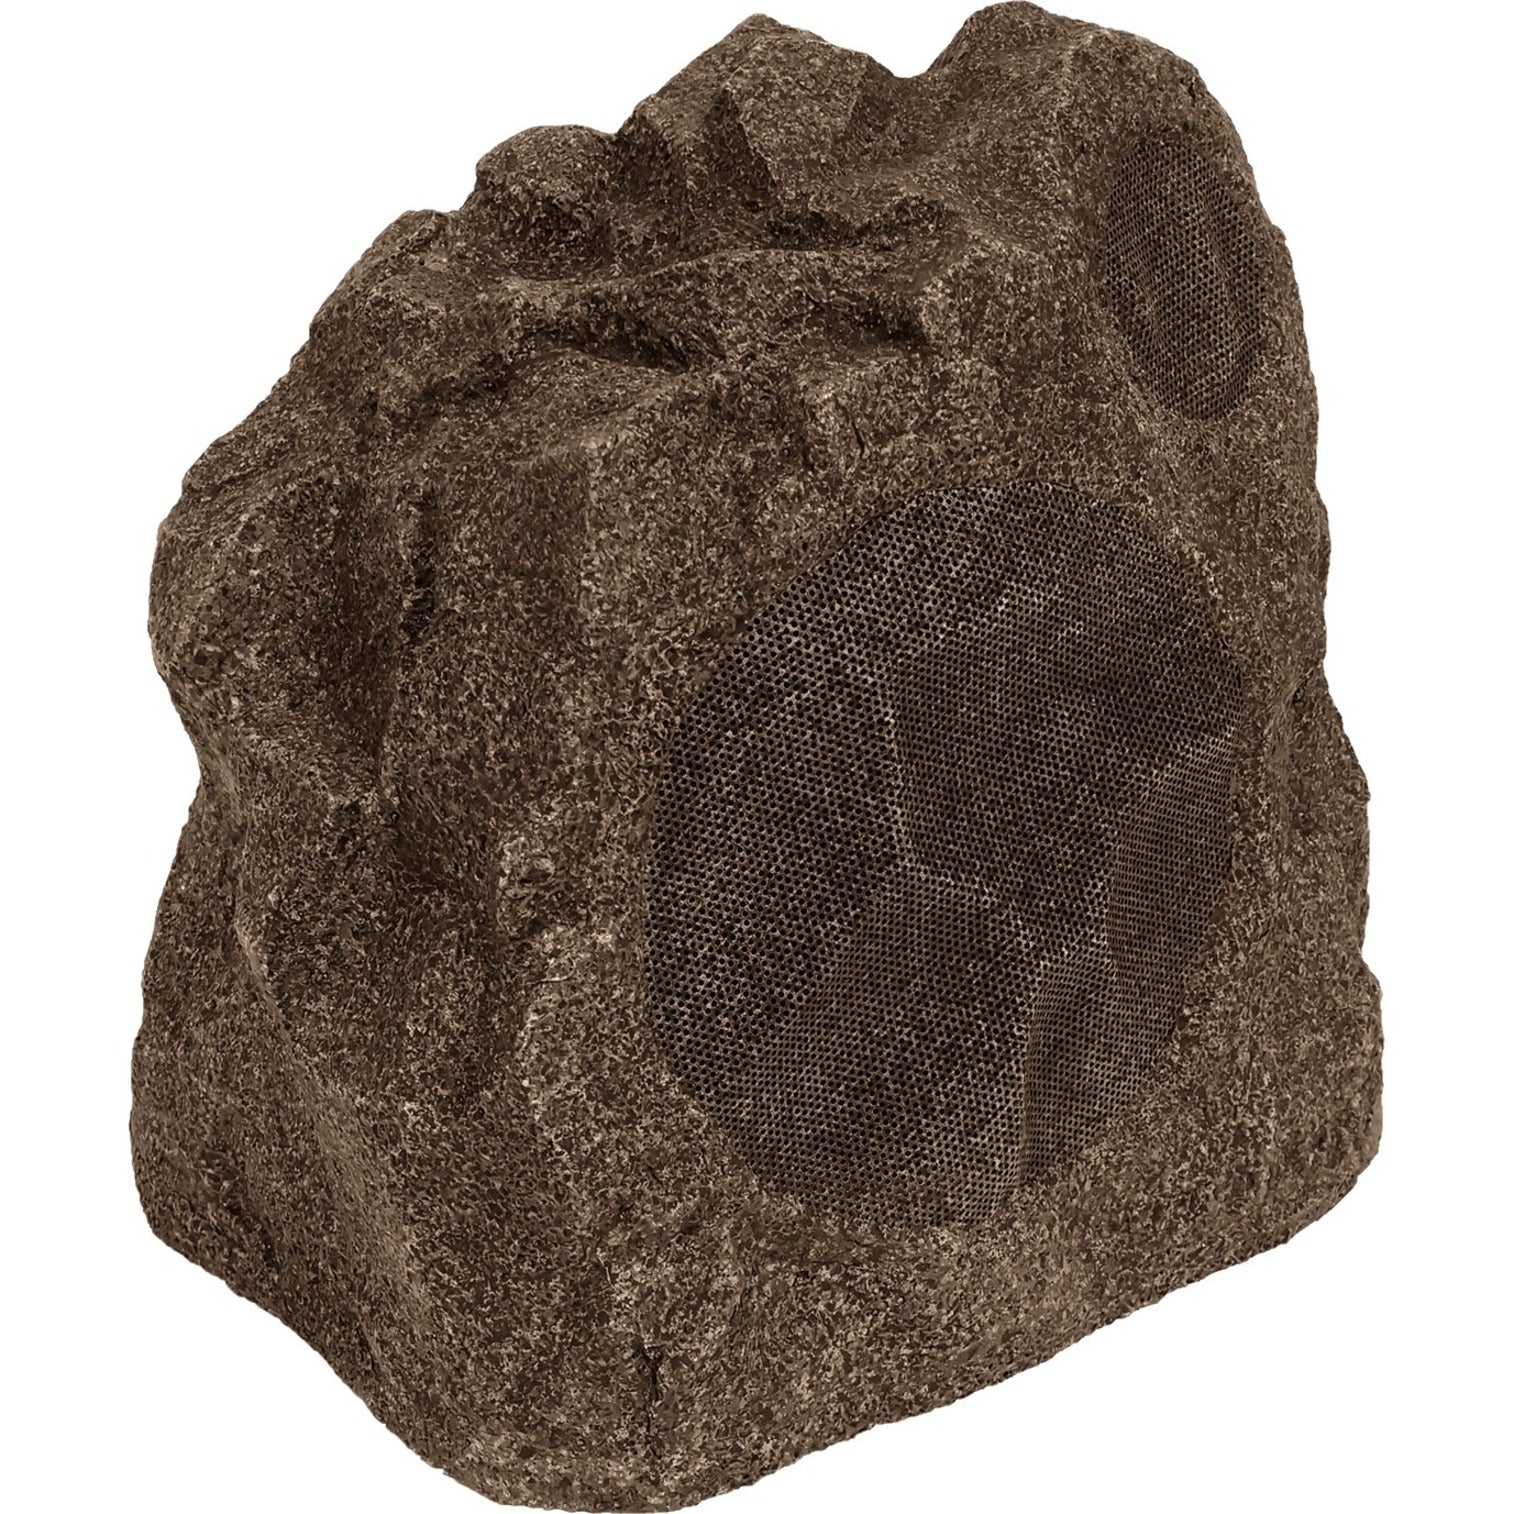 Proficient Audio PAS-RS6-SHALEBROWN Protege RS6 6" Outdoor Rock Speaker, Shale Brown - 5 Year Warranty, Living Room Application, 8 Ohm Impedance